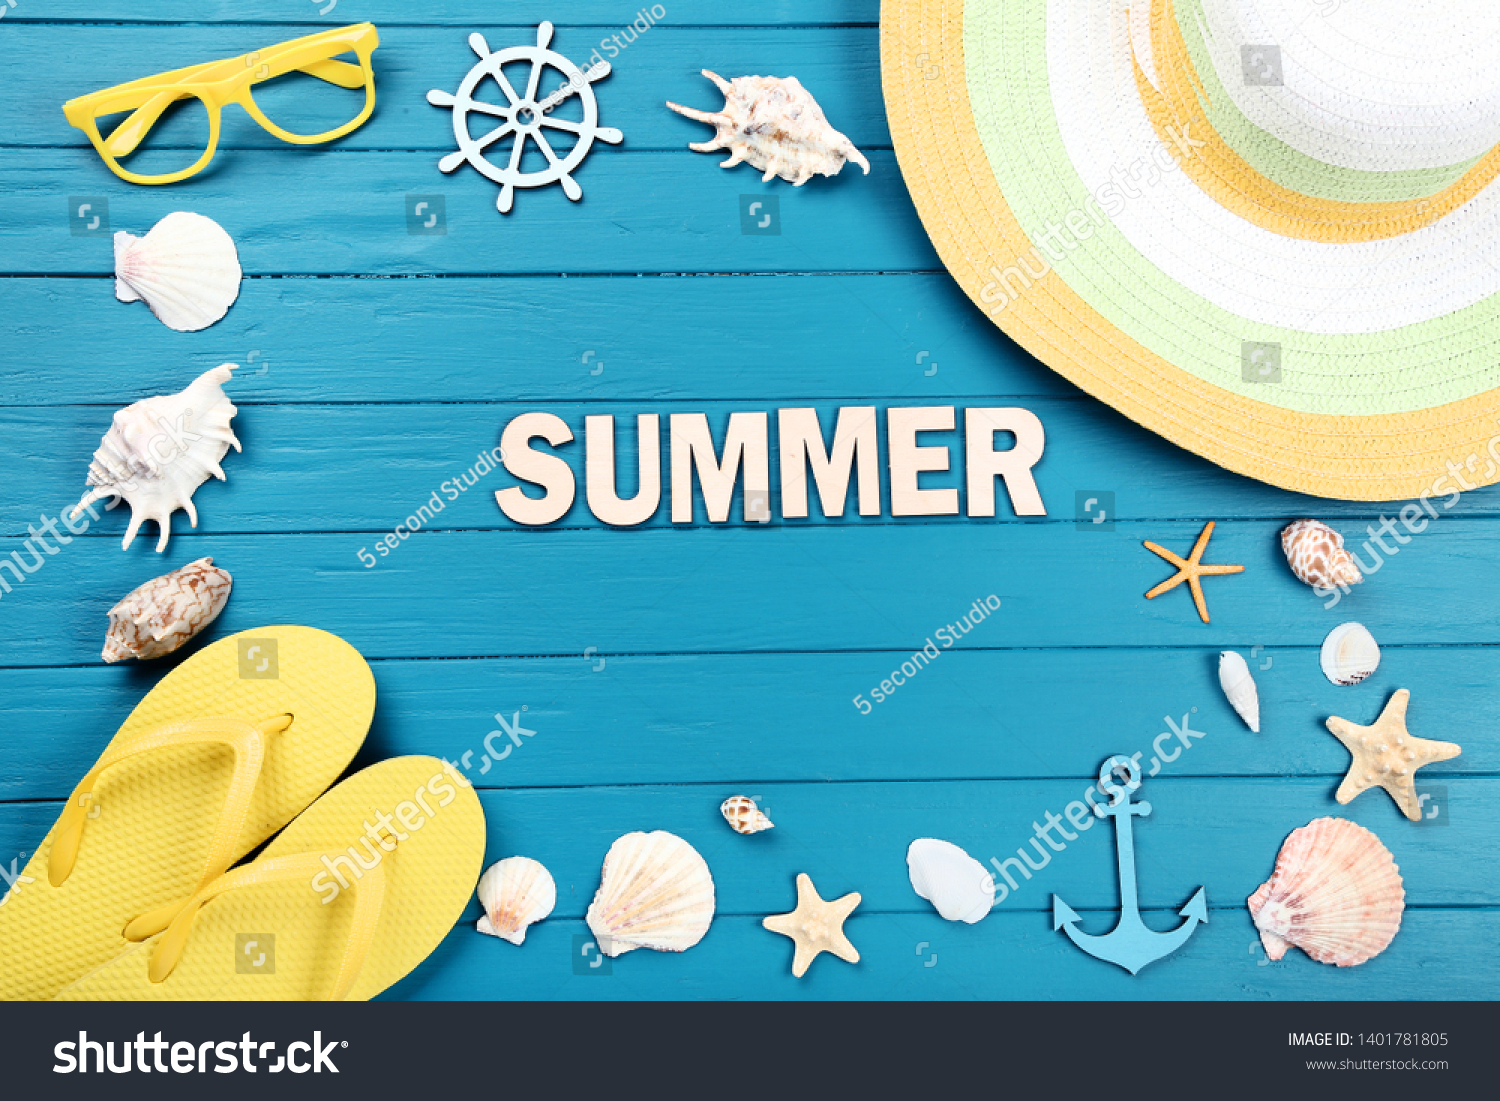 Word Summer with seashells and clothing on blue wooden table #1401781805